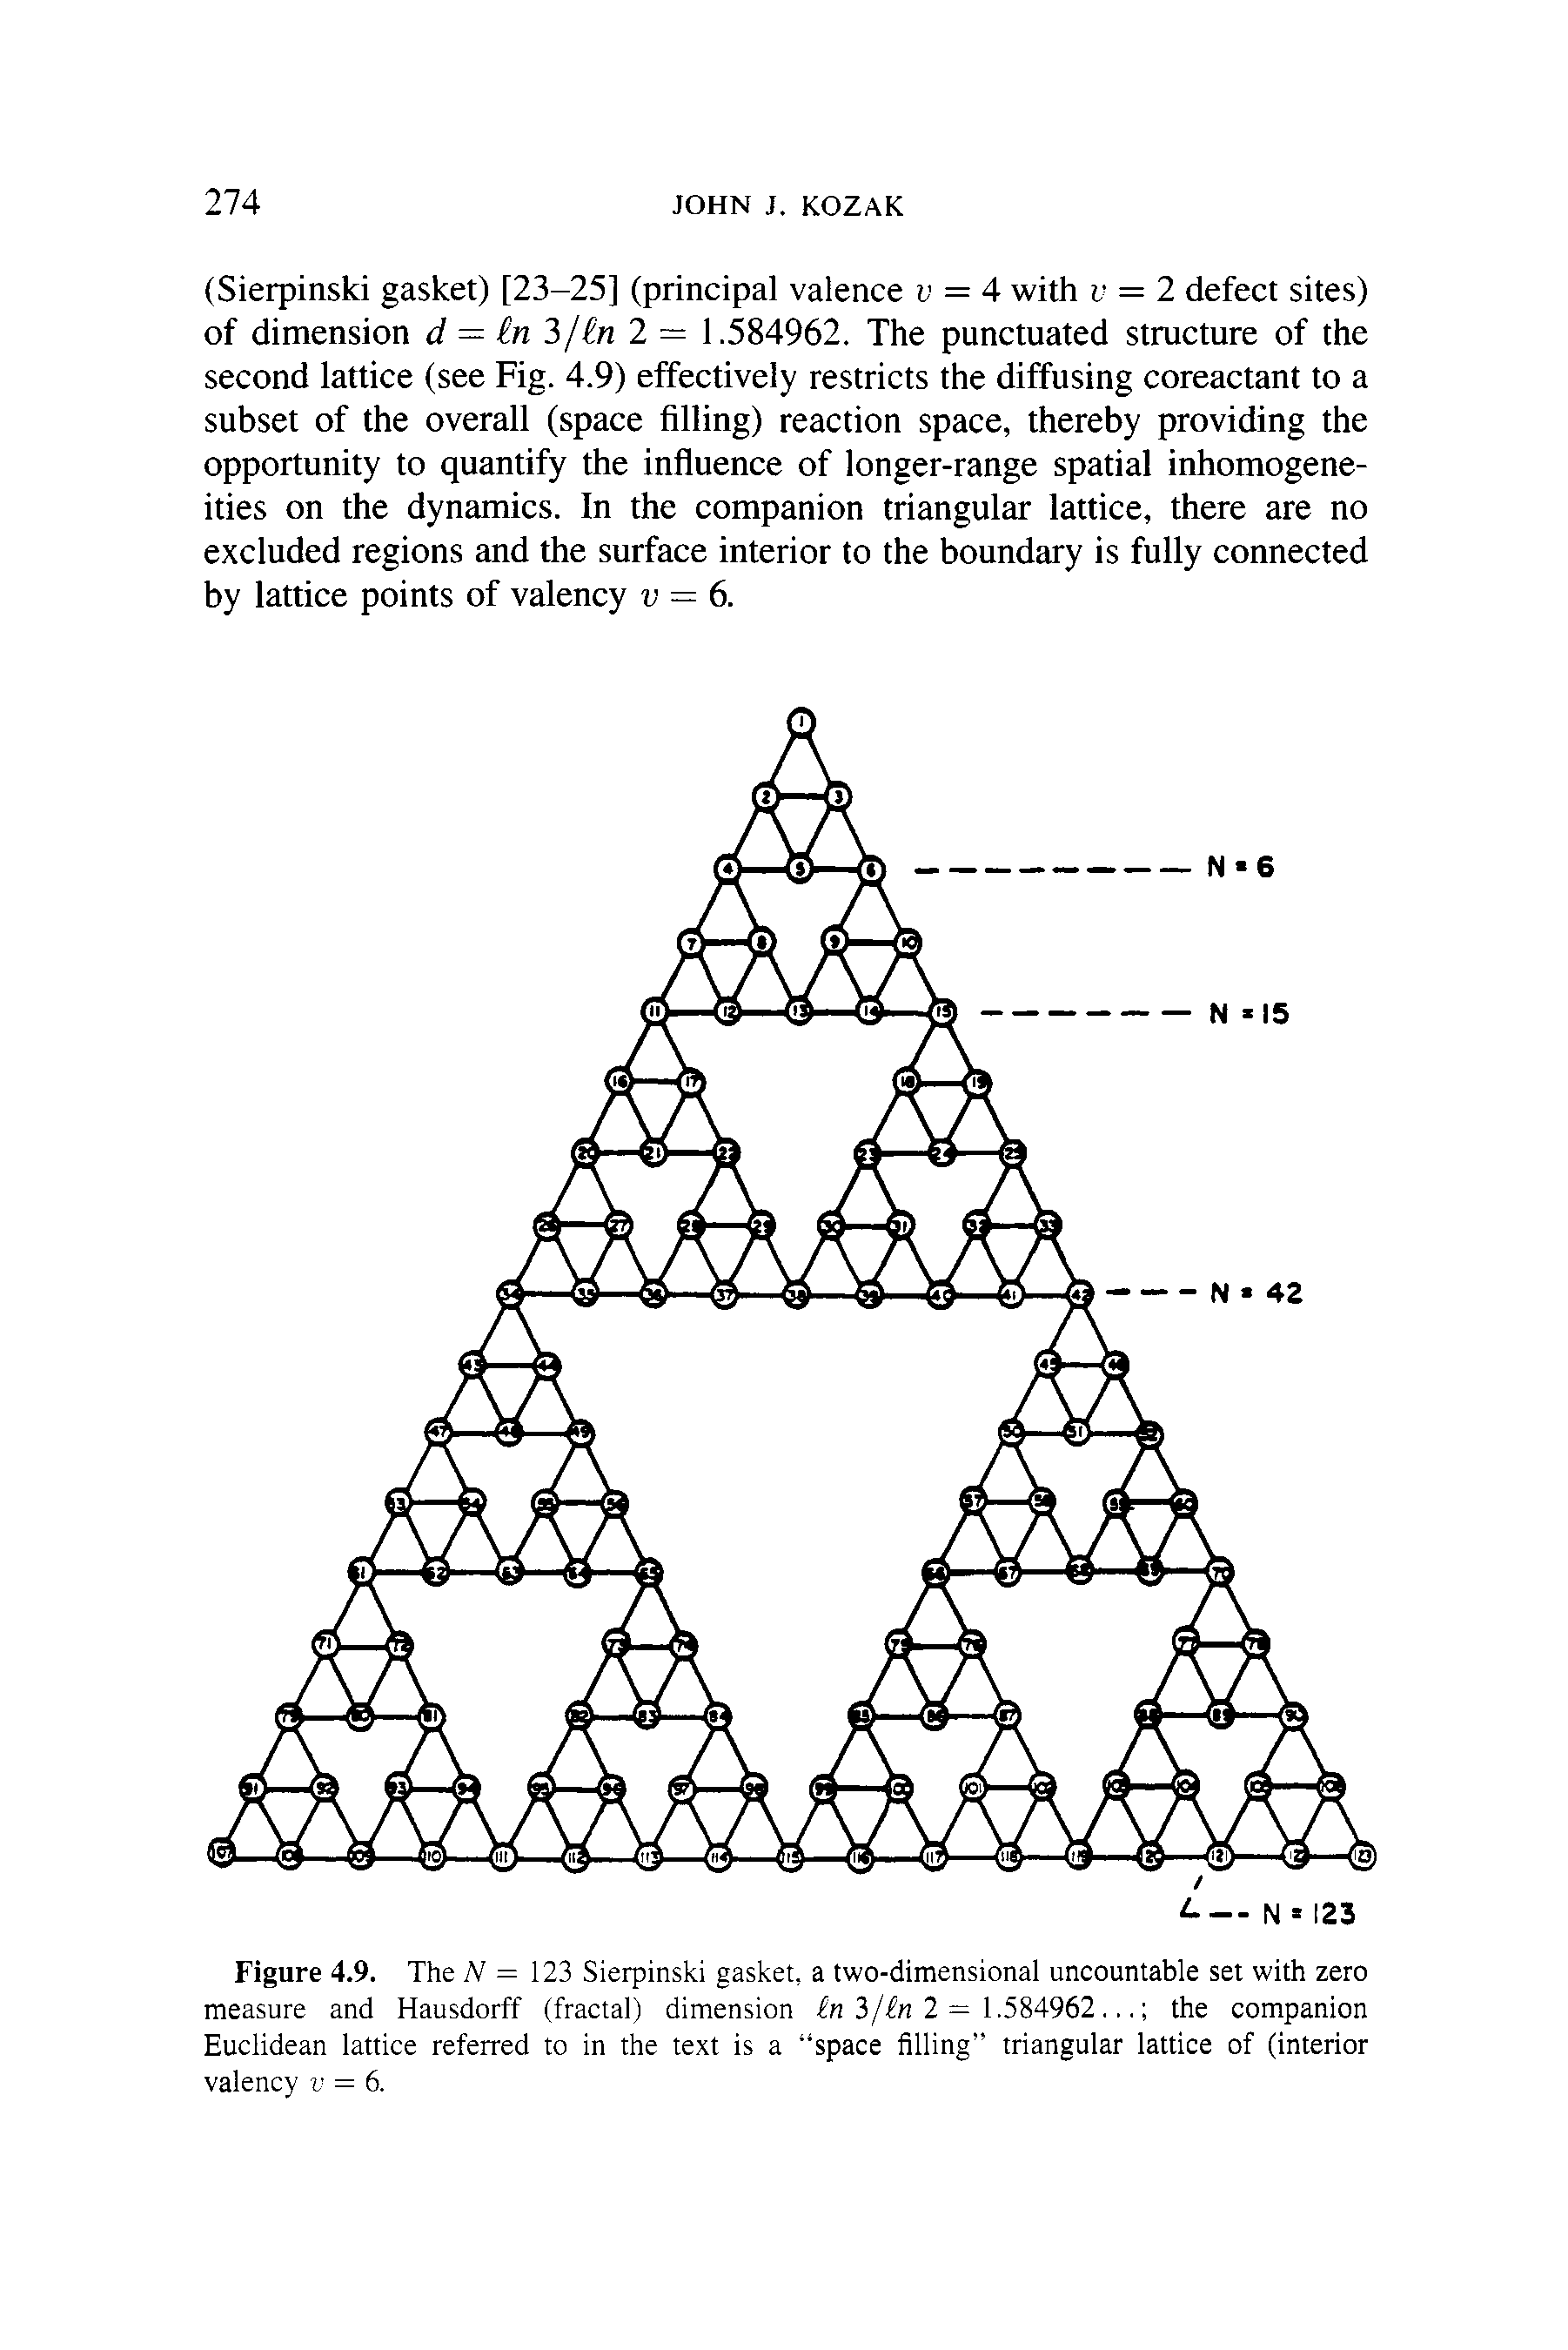 Figure 4.9. The A = 123 Sierpinski gasket, a two-dimensional uncountable set with zero measure and Hausdorff (fractal) dimension 3/ 2 = 1.584962... the companion Euclidean lattice referred to in the text is a space filling triangular lattice of (interior valency v = 6.